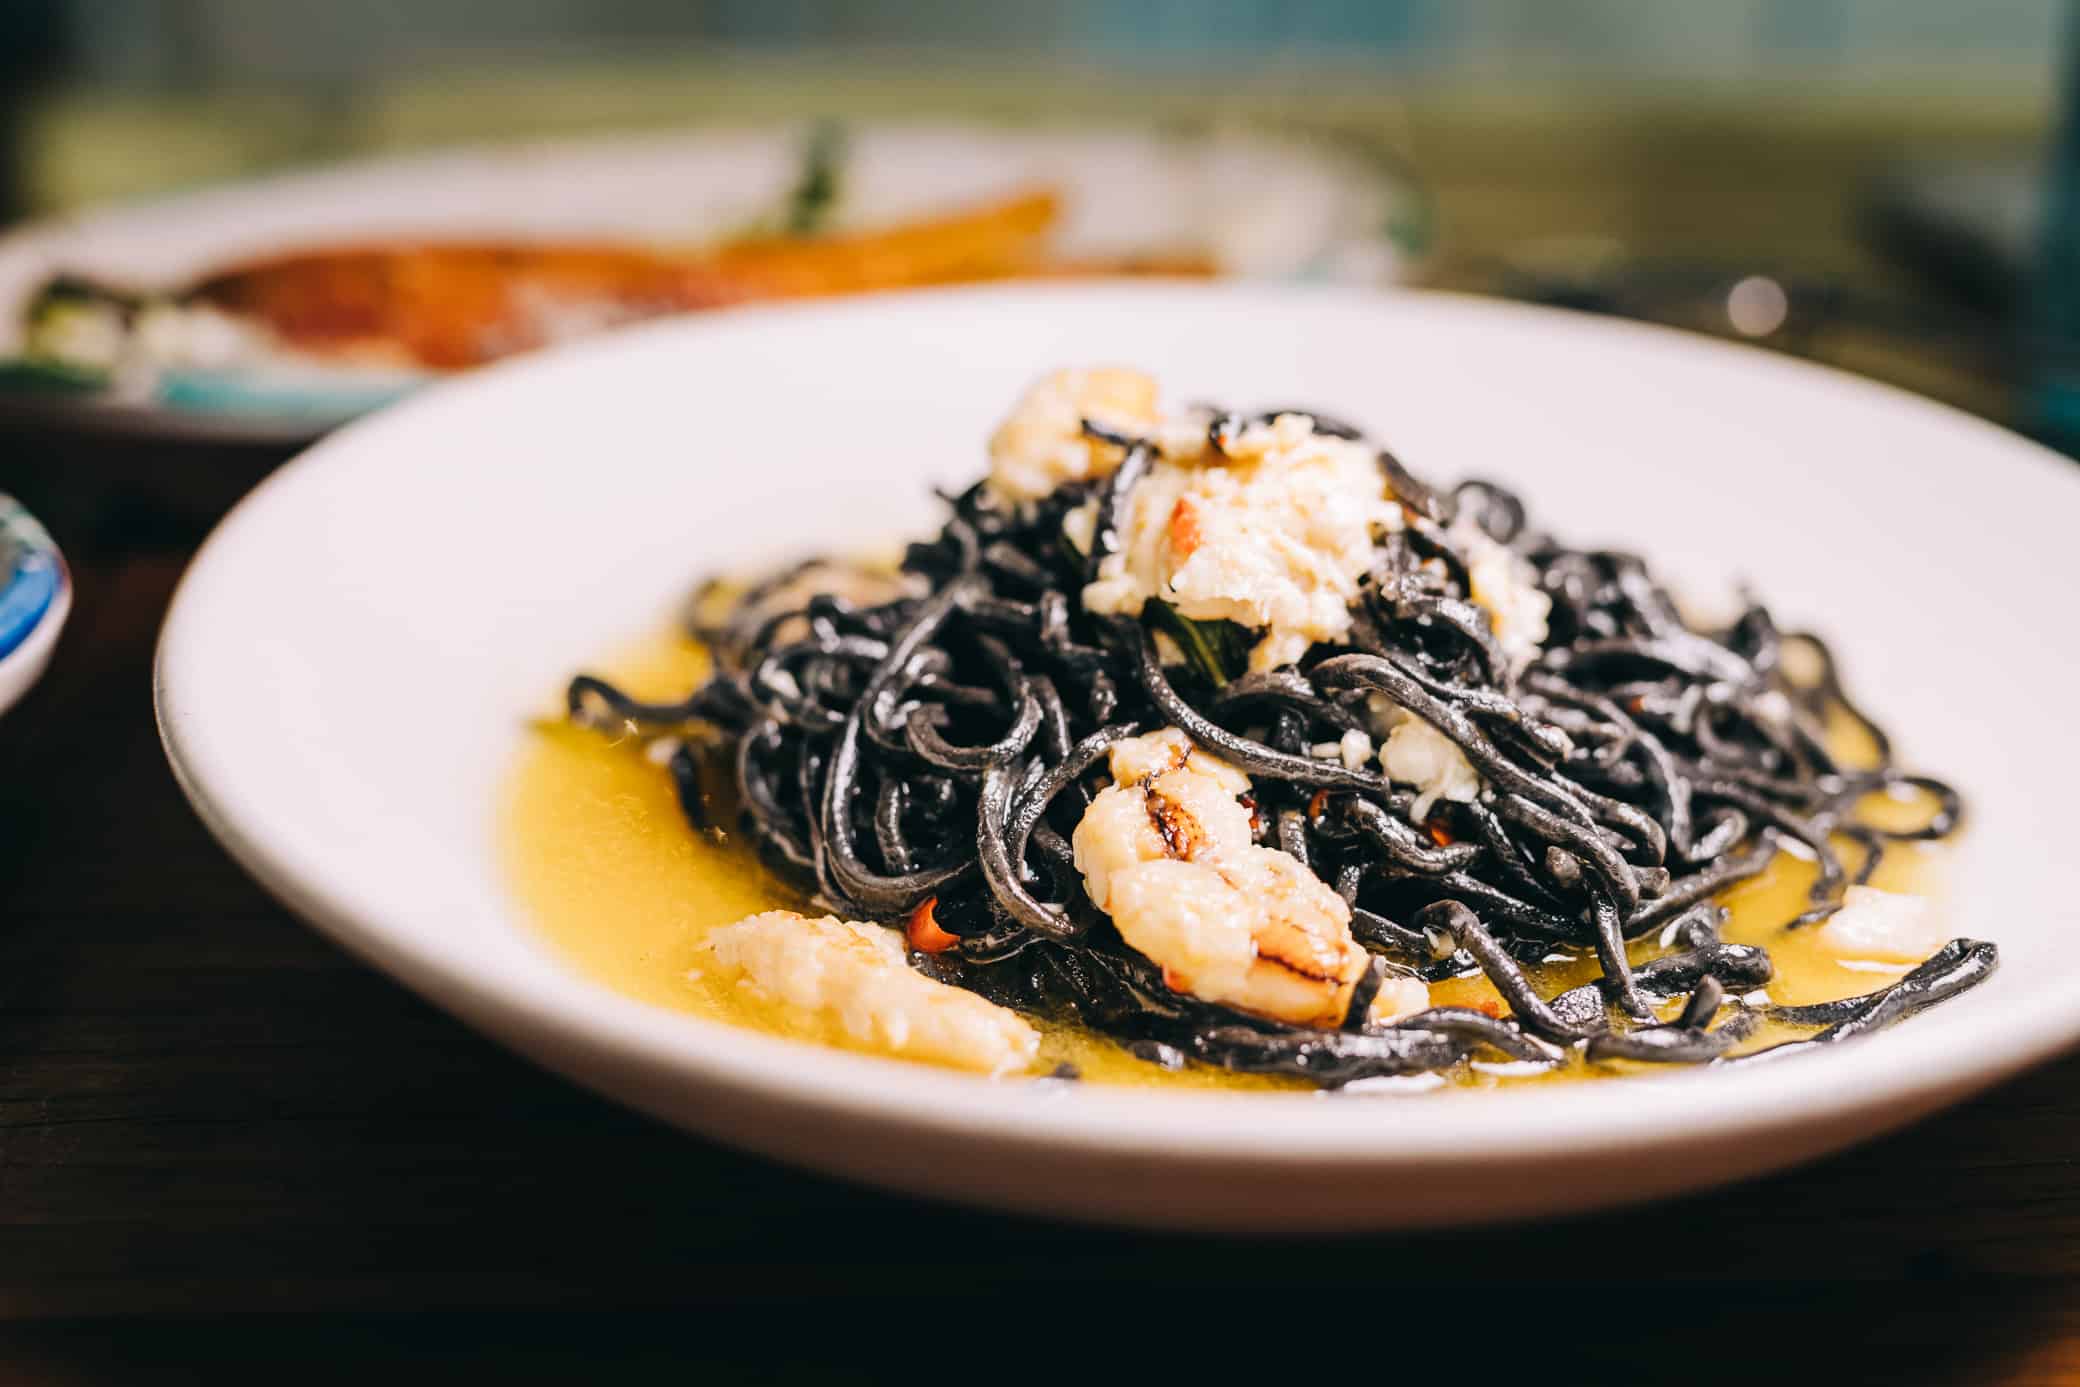 Showstopper squid ink pasta with blue swimmer crab